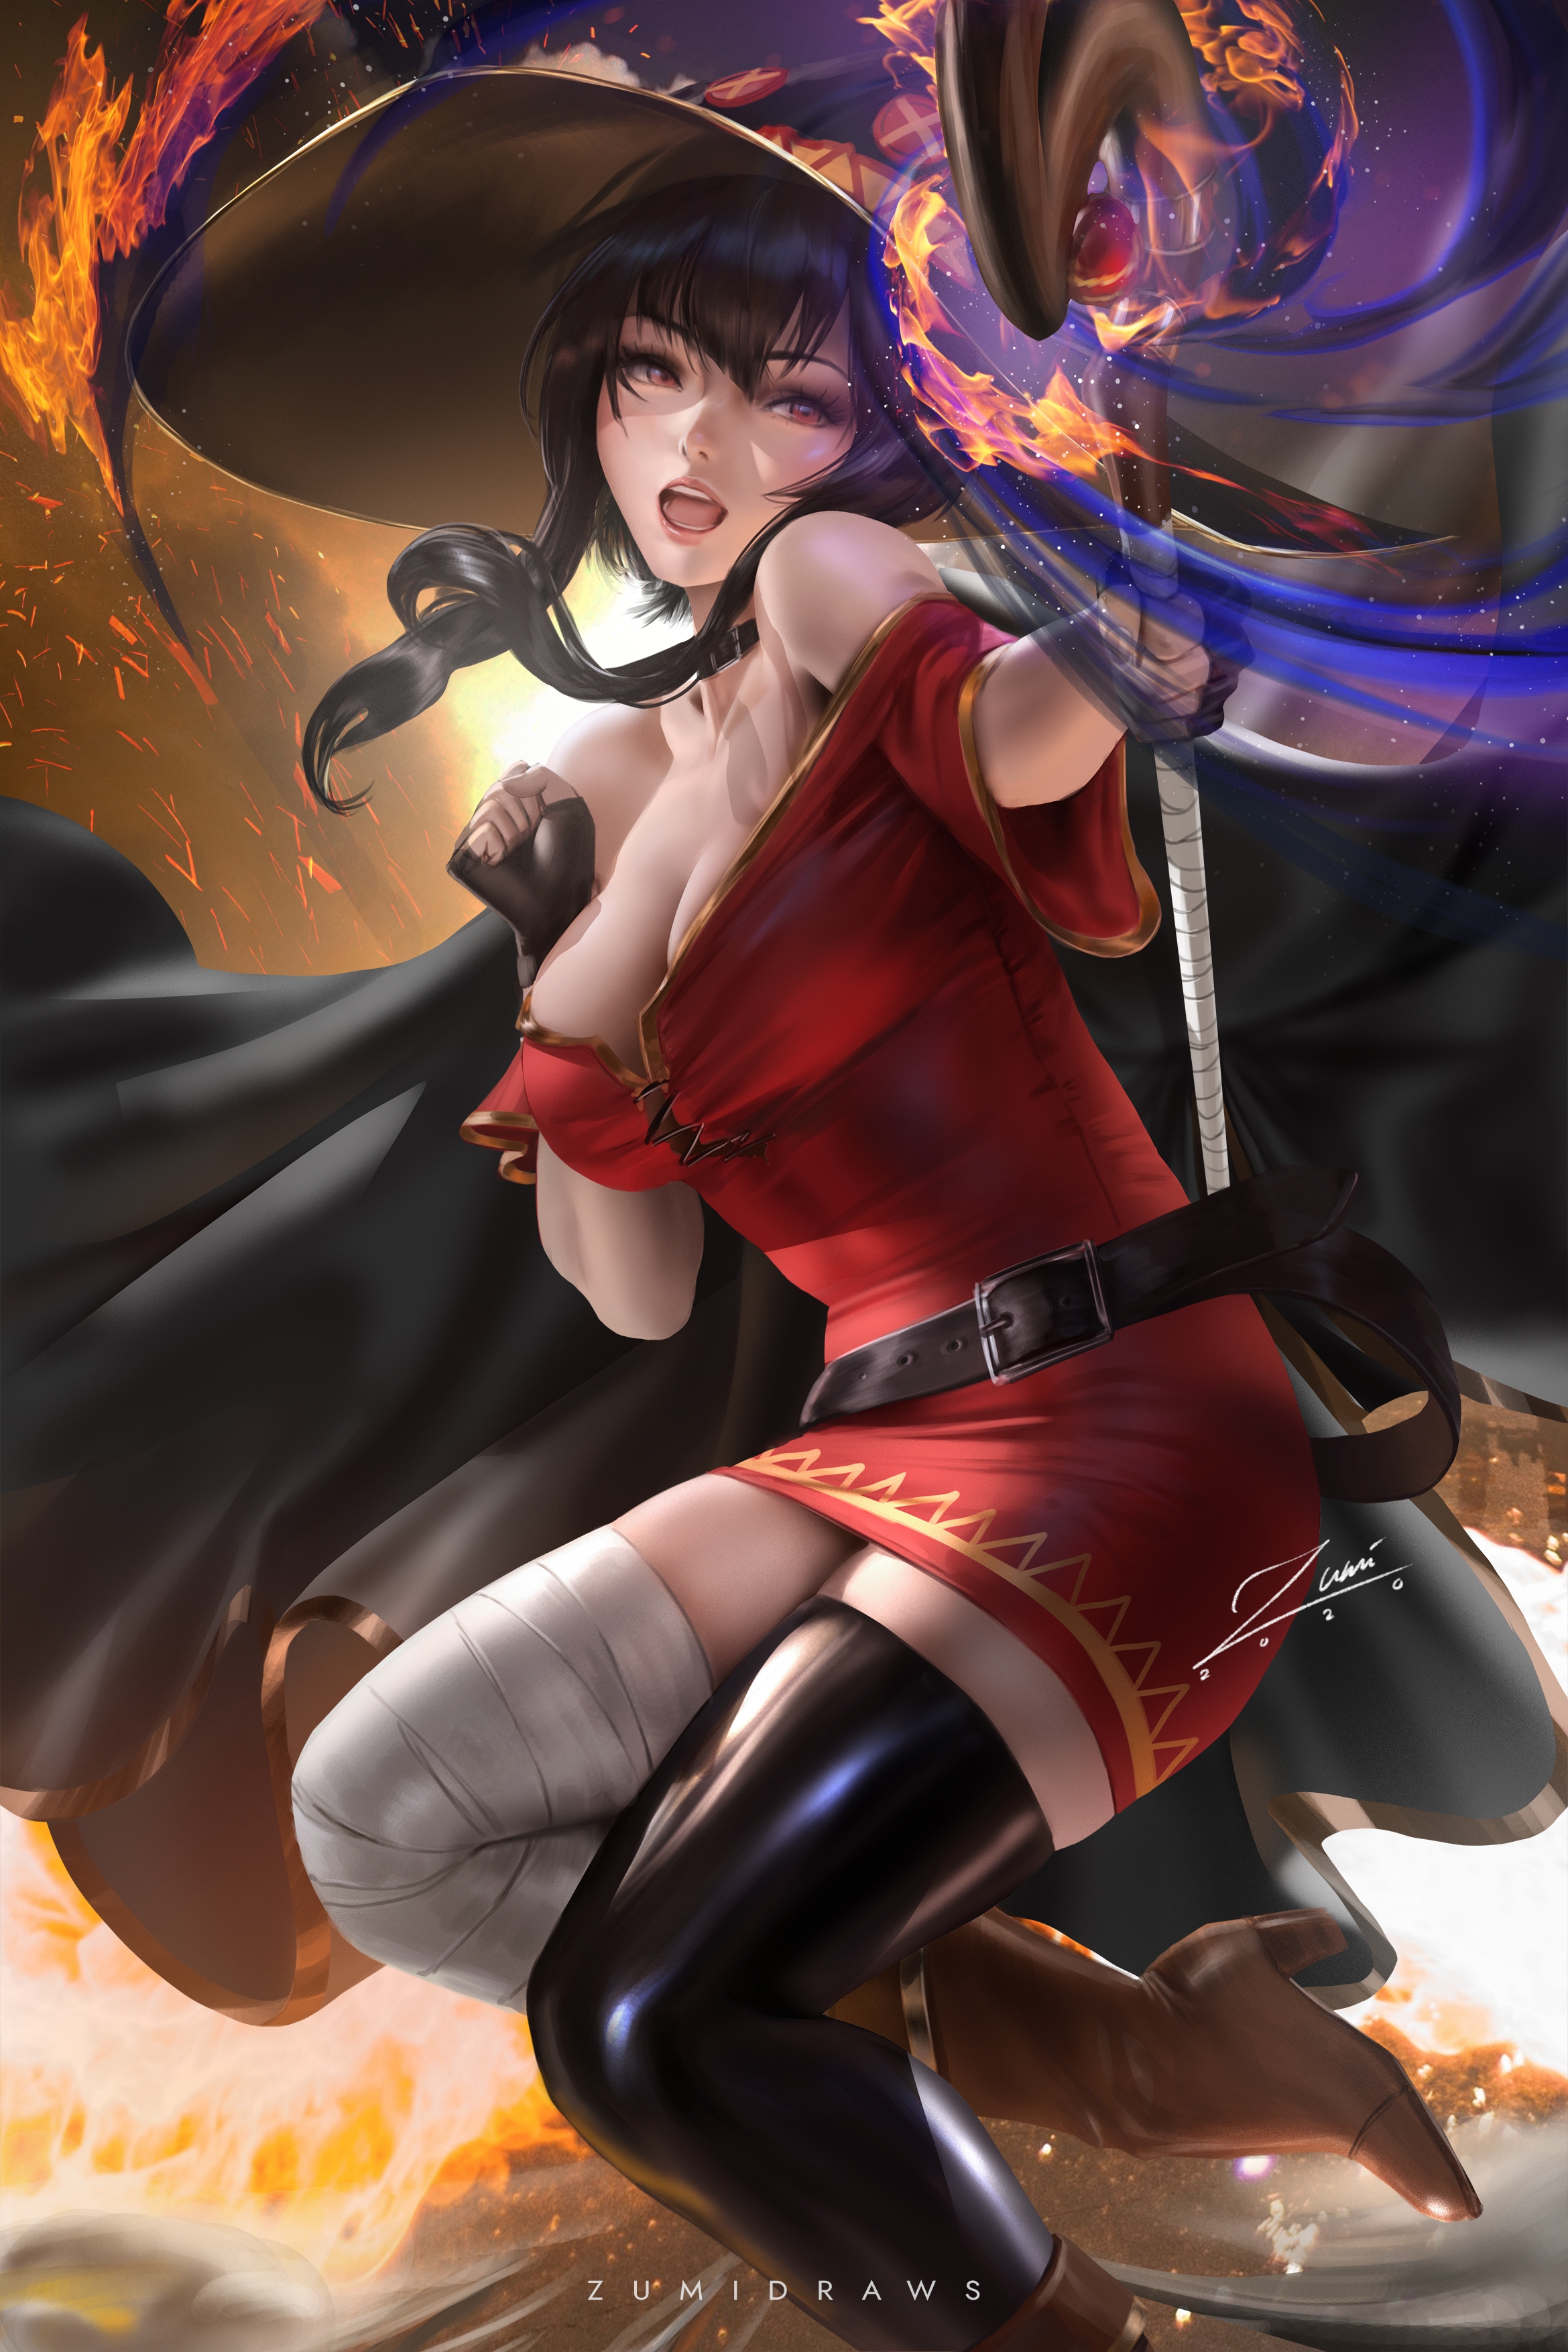 Anime 2339x3508 Megumin (KonoSuba) Kono Subarashii Sekai ni Shukufuku wo! anime girls anime fan art fantasy girl witch hat scepters fire brunette bangs looking at viewer red eyes open mouth choker fingerless gloves bare shoulders cleavage dress red dress cape bandages thigh-highs boots fantasy art portrait display artwork drawing digital art illustration watermarked Zumi happy sparks explosion witch